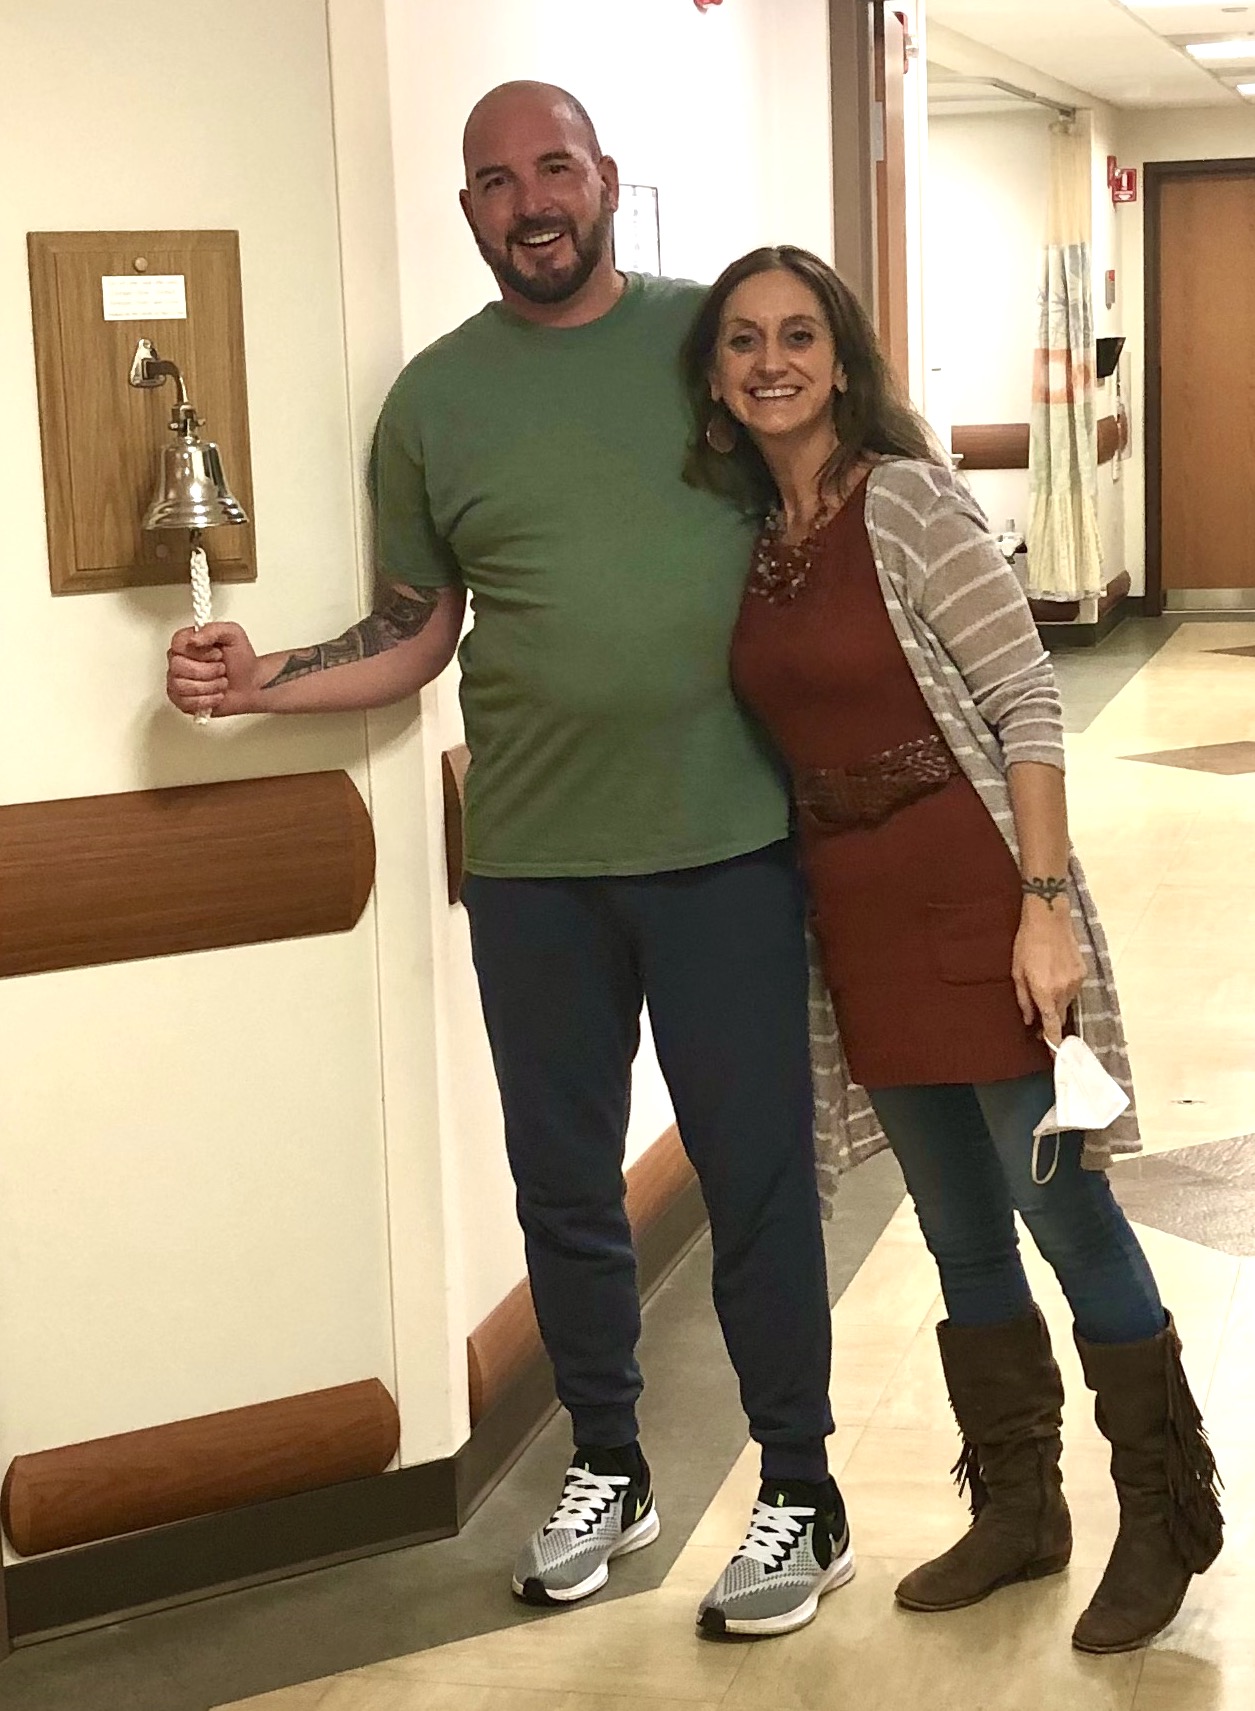 a man named adam miskow and a woman named jill ford posing and smiling as adam rings a bell in celebration of finishing his radiation treatment